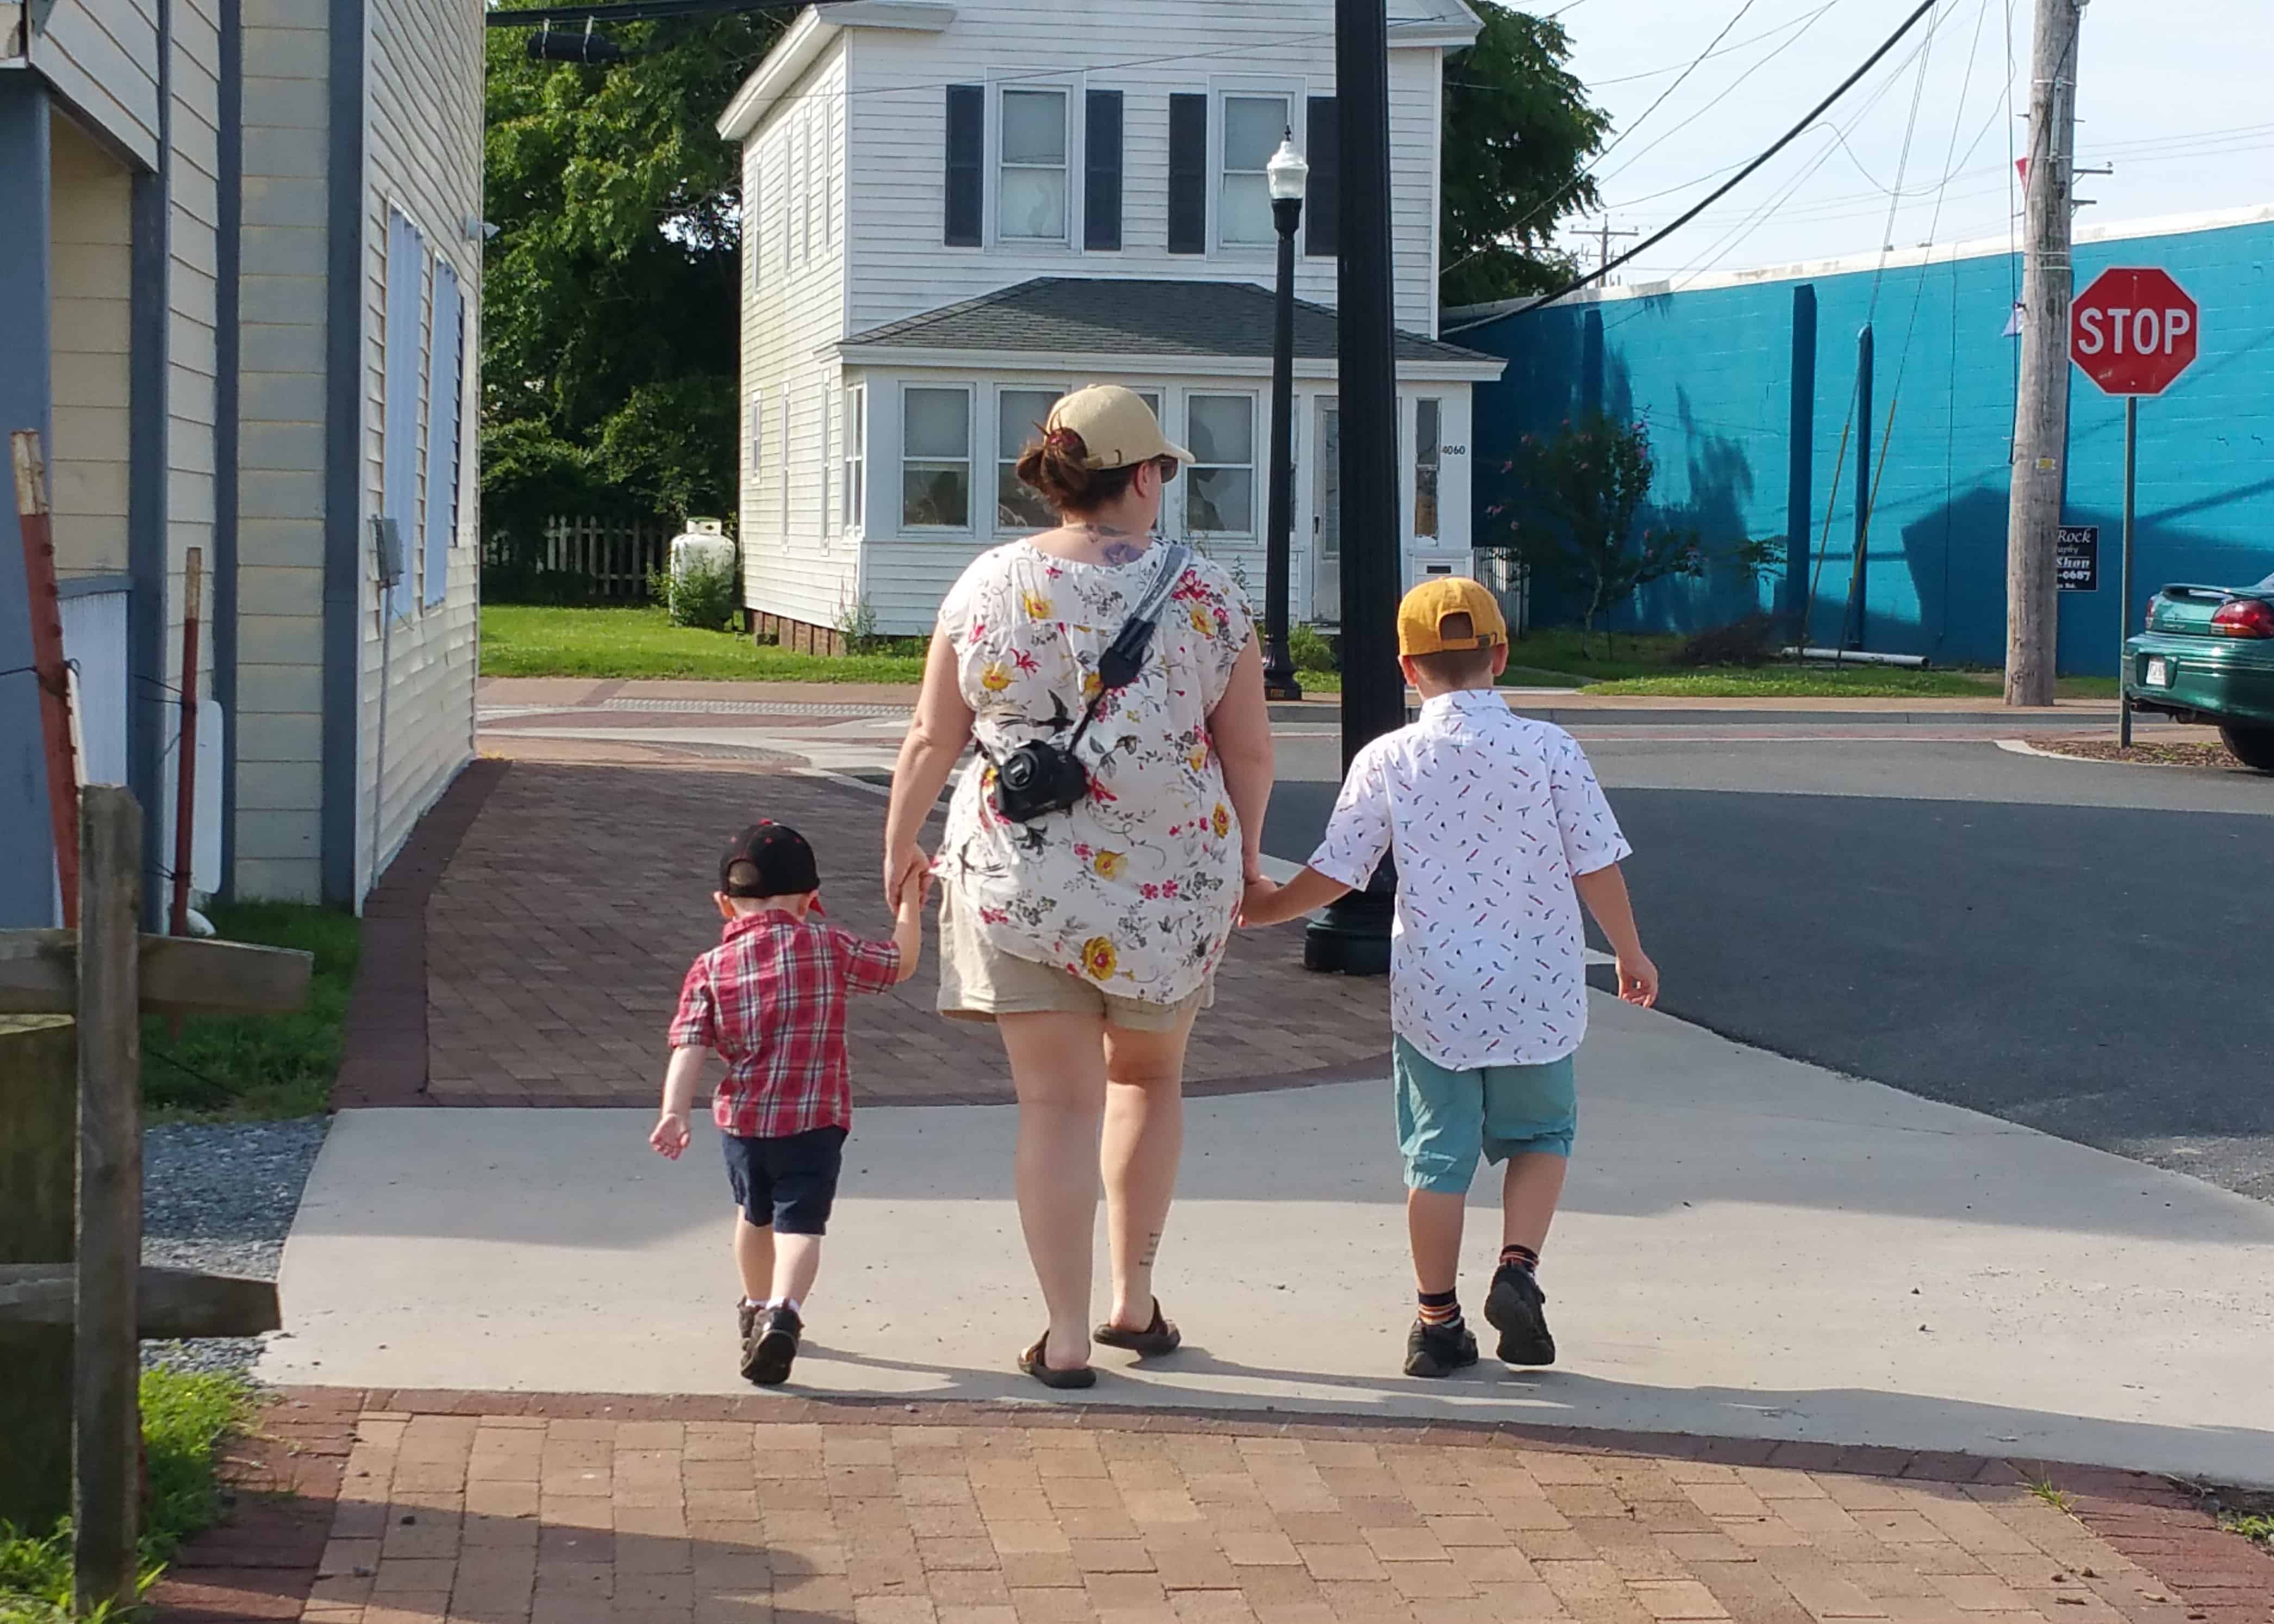 MOM WALKING WITH TWO BOYS